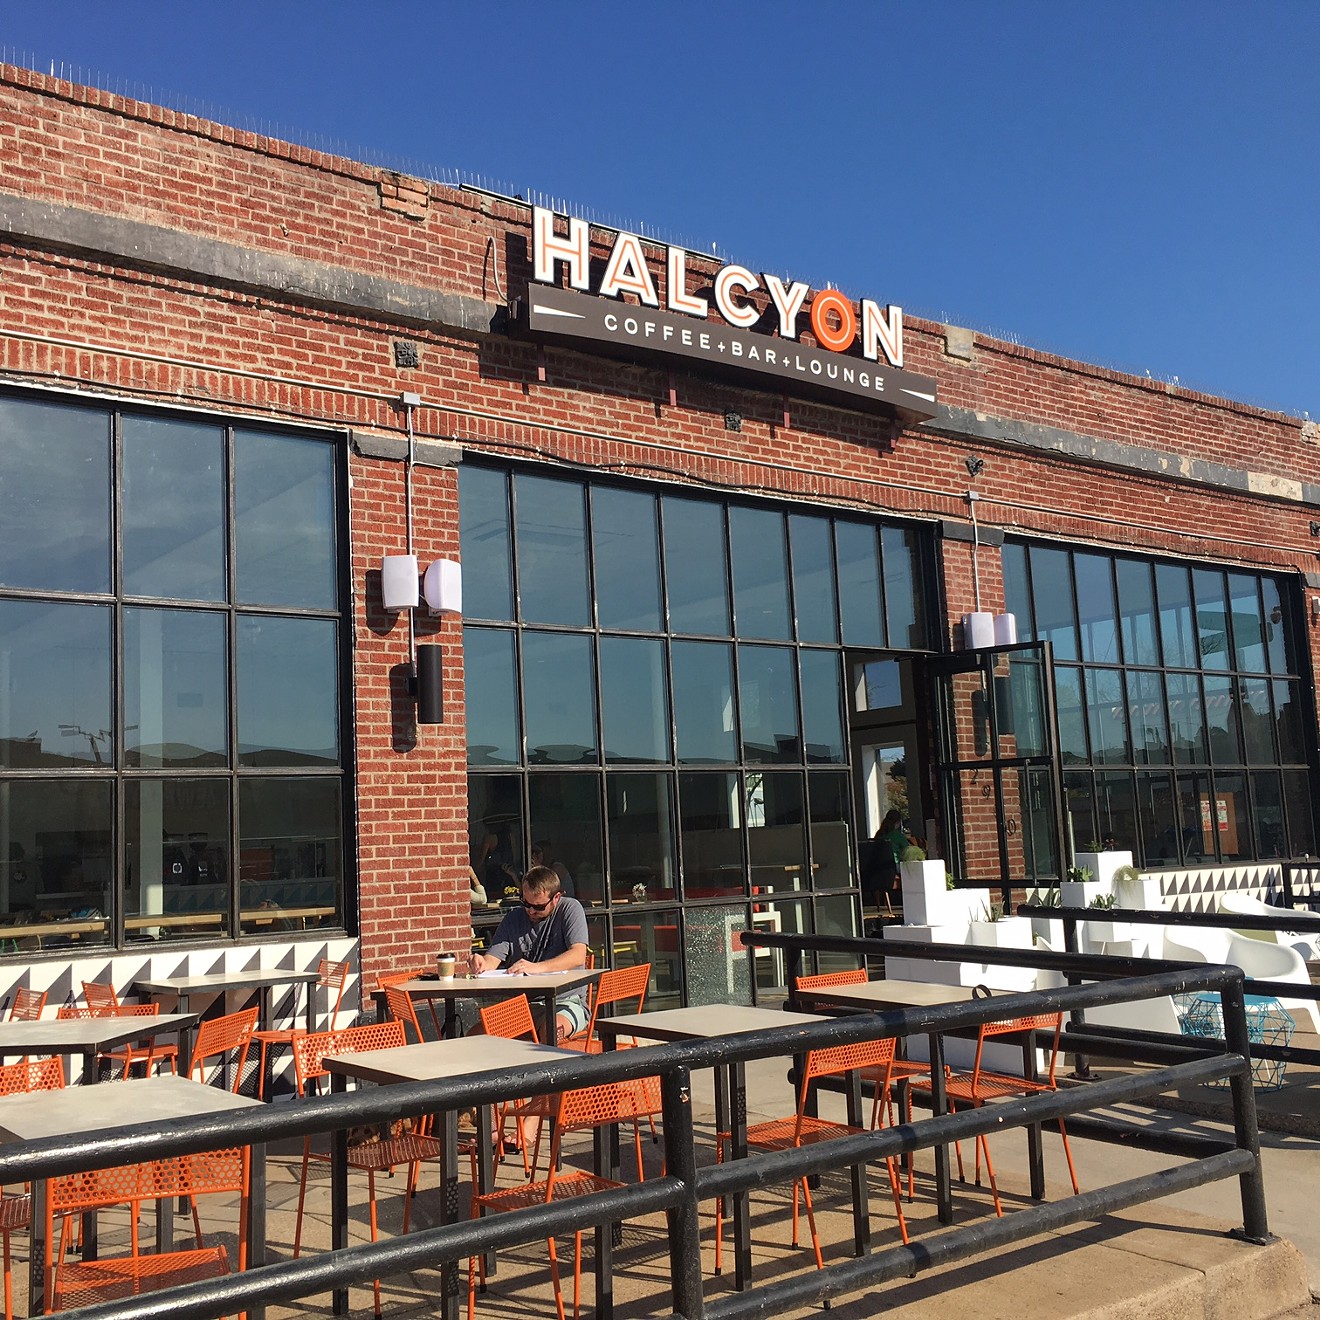 Halcyon Coffee Bar & Lounge is now in soft open on Greenville Ave. and celebrates its grand opening April 6.